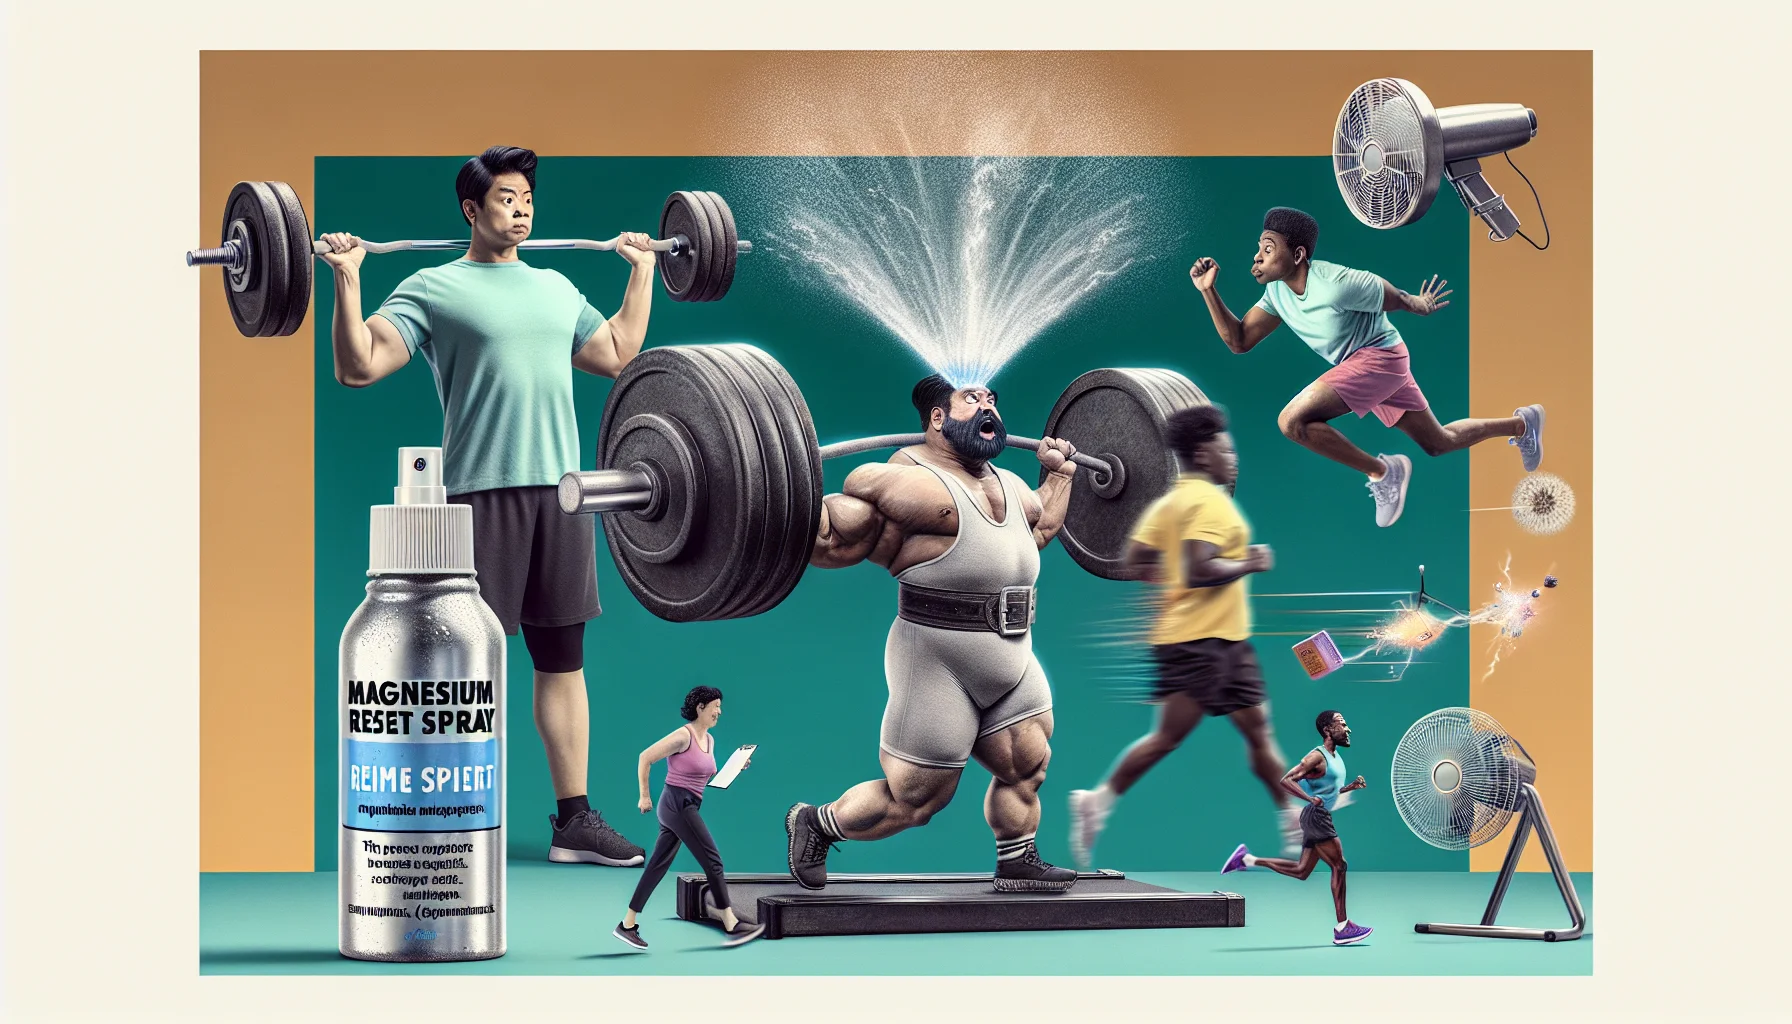 Imagine a humorous scenario taking place in a gym. A South-Asian male bodybuilder is mid deadlift, and his muscles are bulging impressively. However, on closer inspection, it's not sweat on his forehead but rather a miniature fountain of magnesium reset spray, symbolizing how he uses supplements to enhance his performance. On a nearby treadmill, a Black female runner is so fast, she's literally creating a wind tunnel, with funny flying objects around, like a fan, a hat, and a clipboard, caught in the air. From her water bottle, magnesium reset spray is seen gushing out like a geyser. This composition encapsulates the idea that supplements can provide an extra edge in sports.